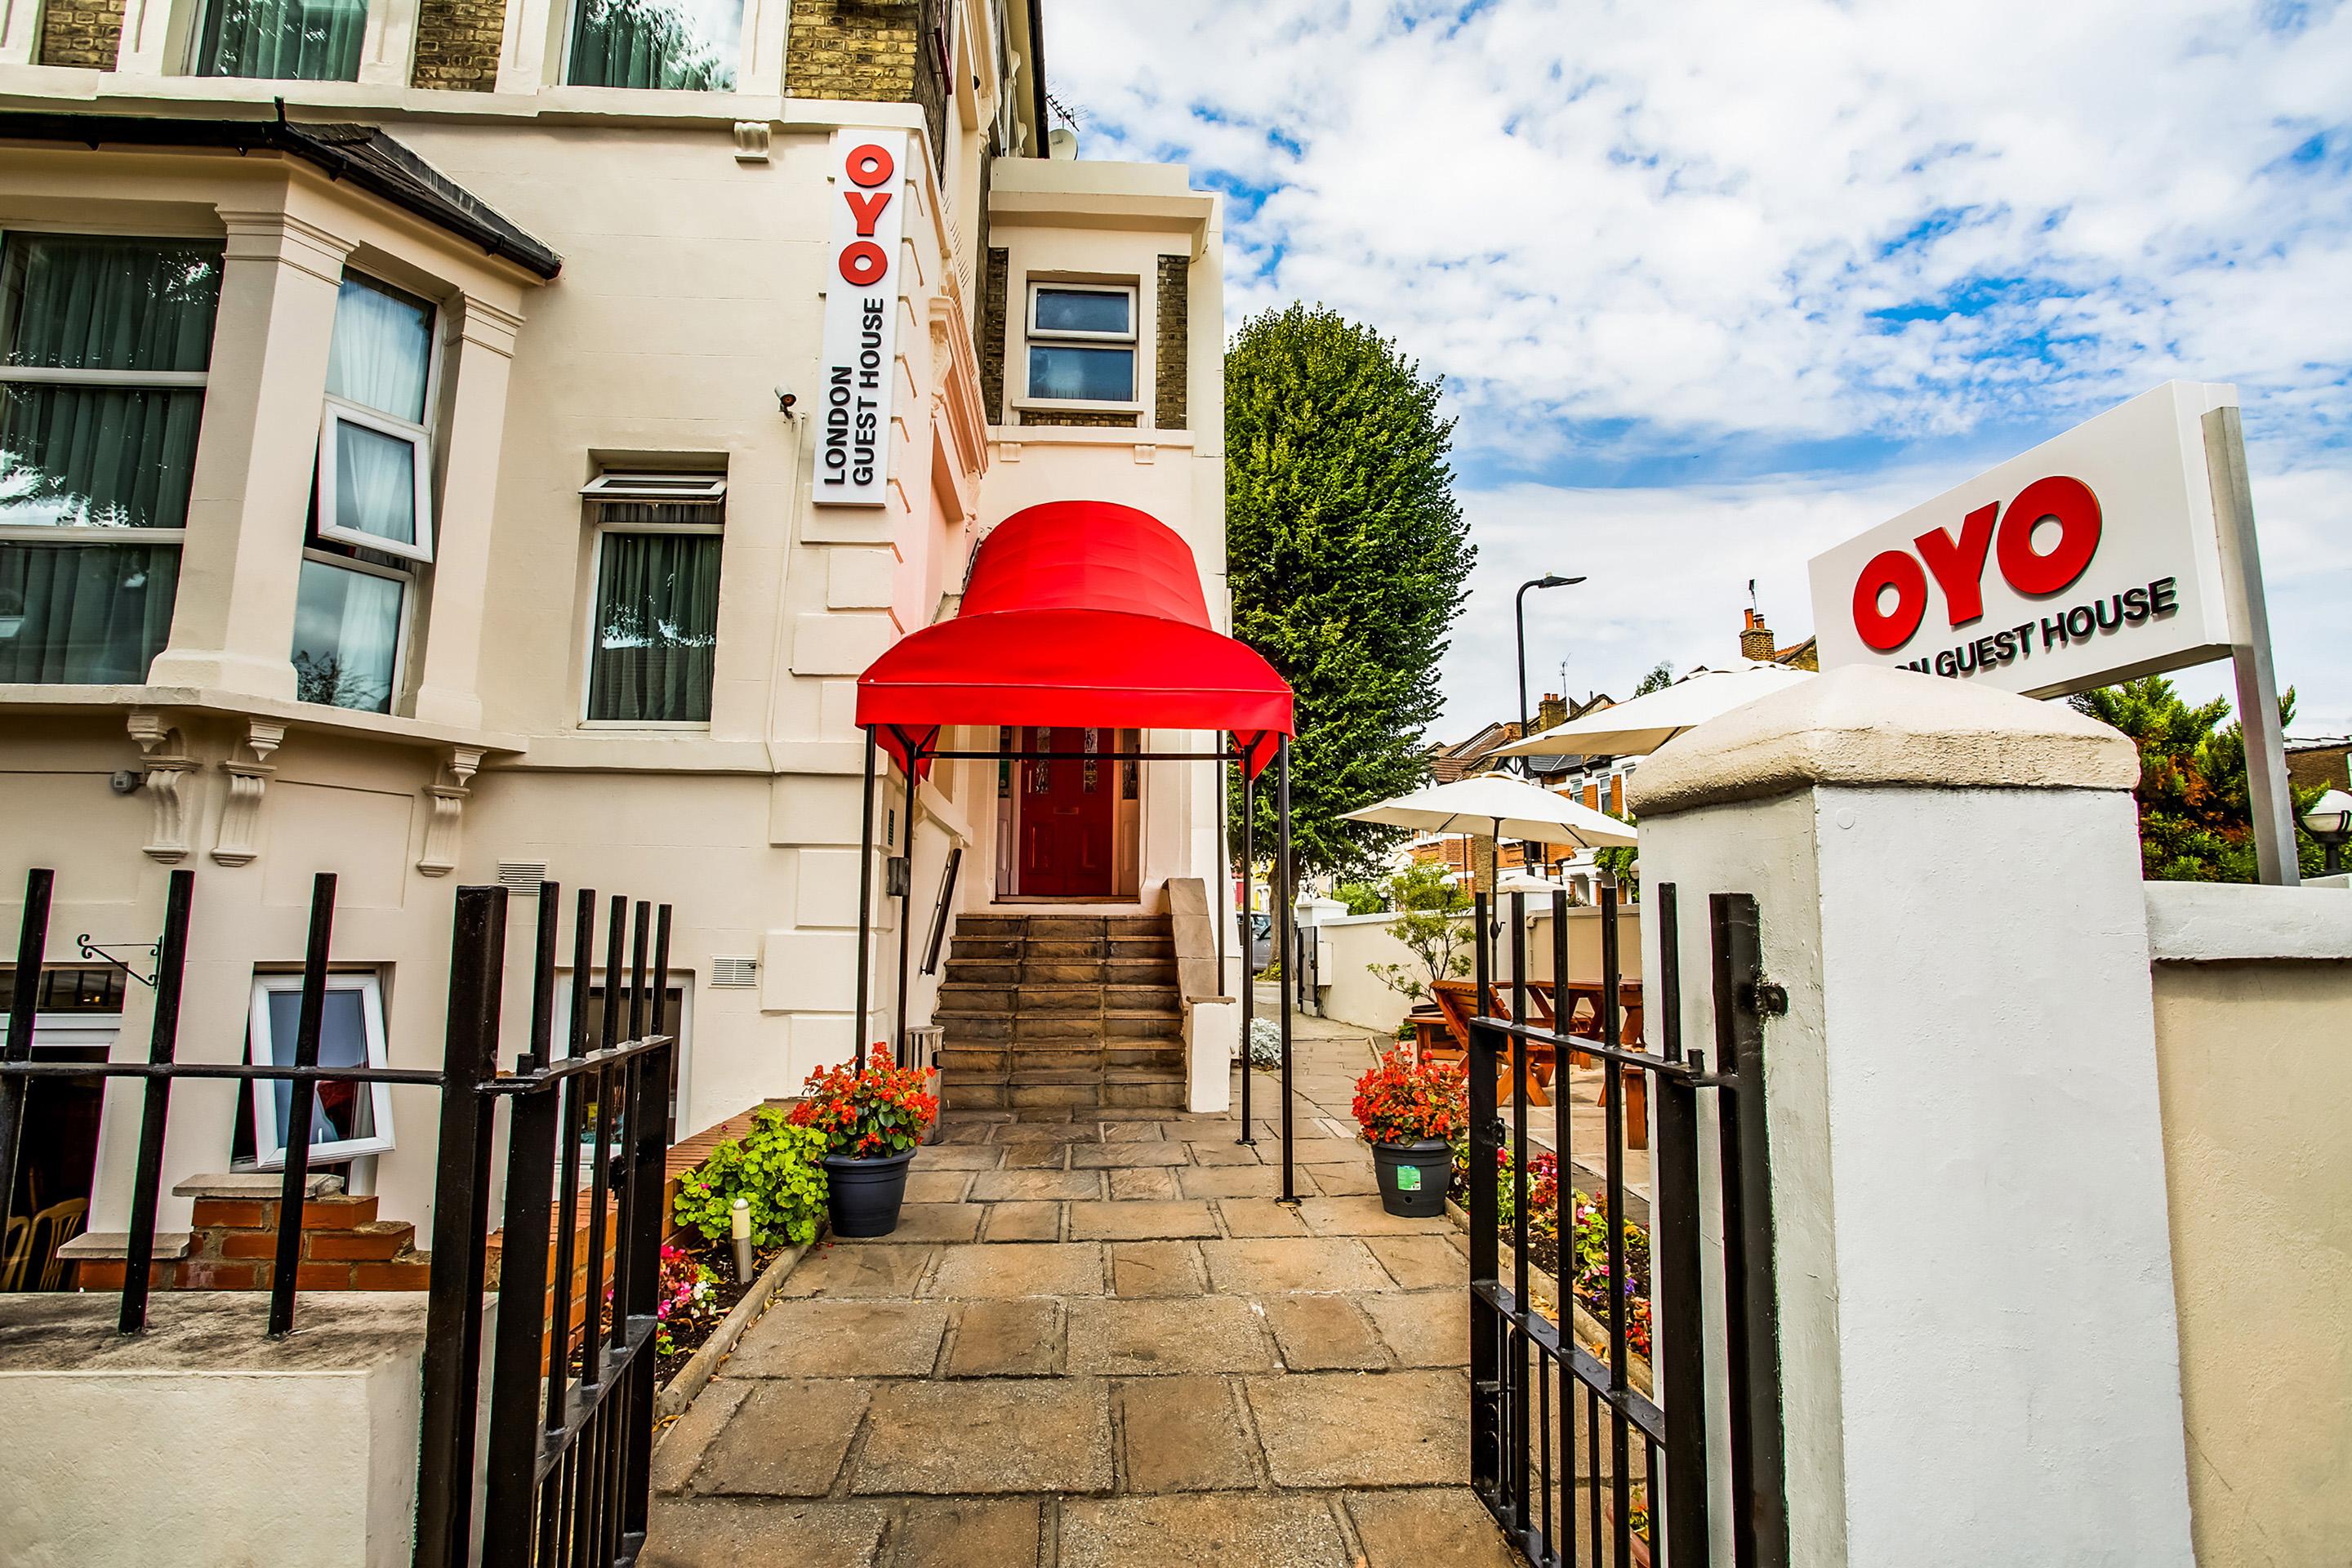 Oyo London Guest House Exterior photo